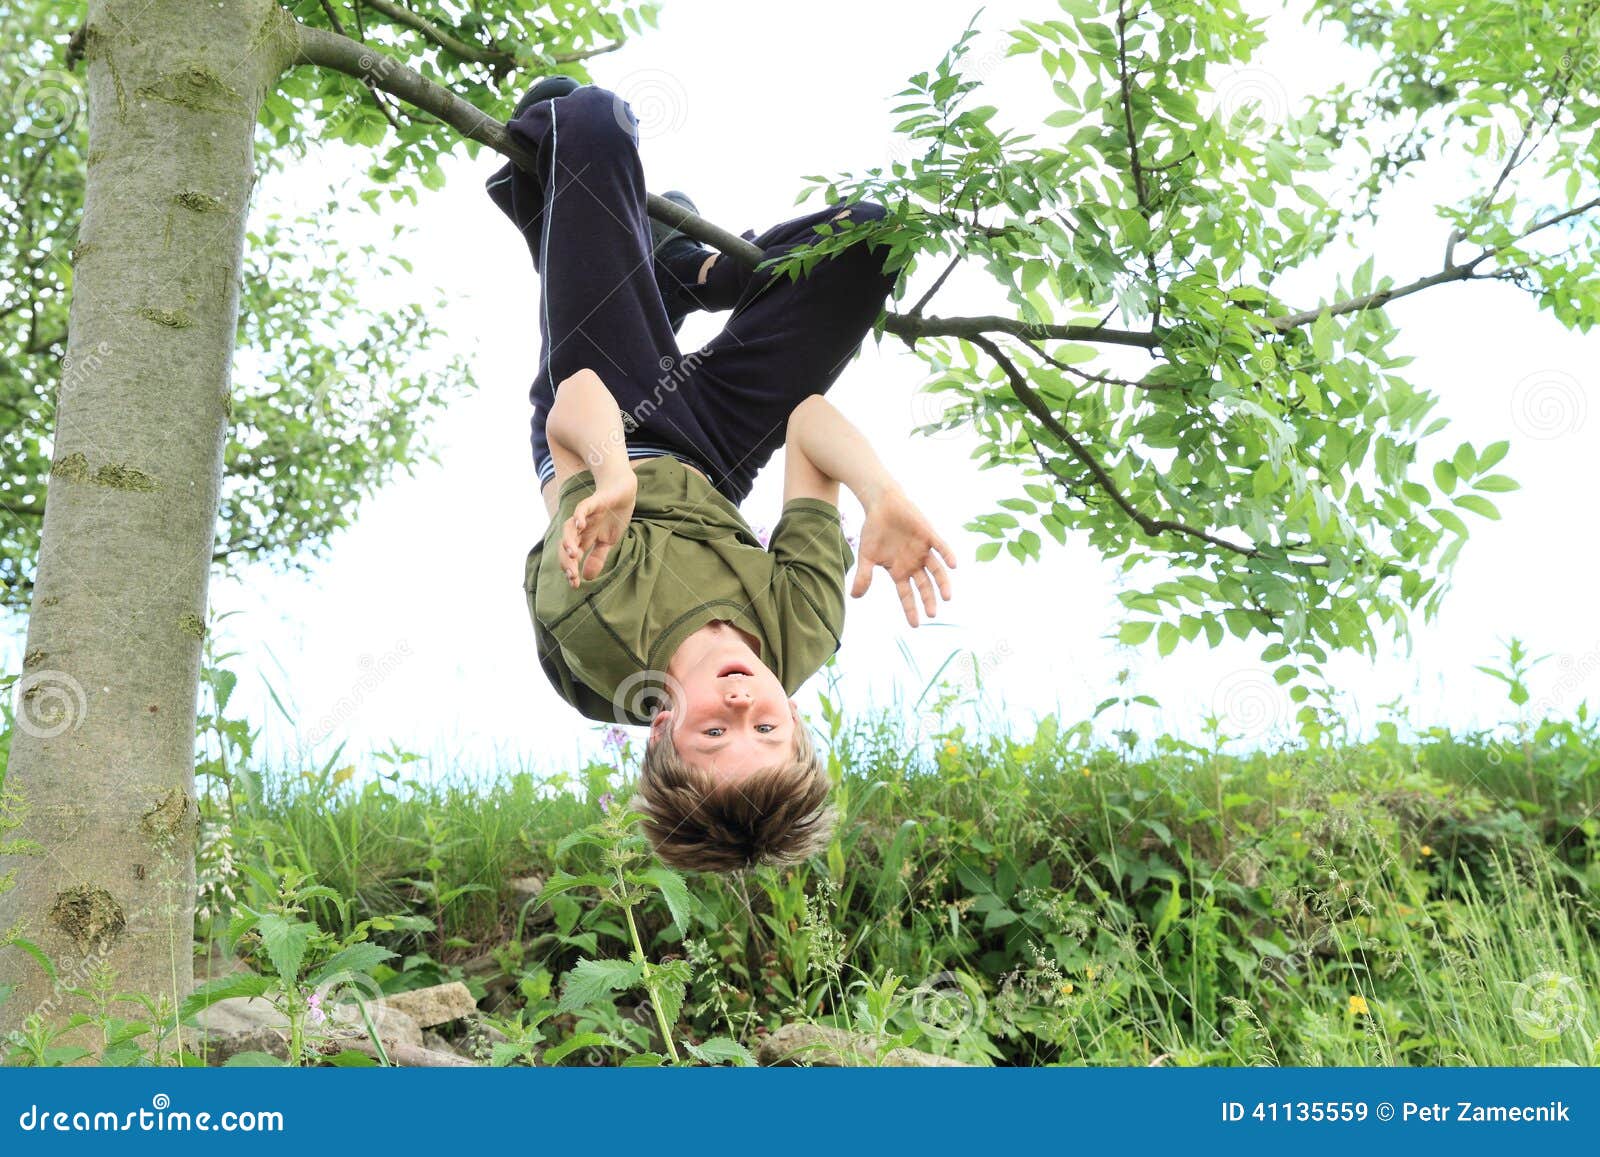 Kids Hanging From Branch Of Tree Royalty Free Stock Image 